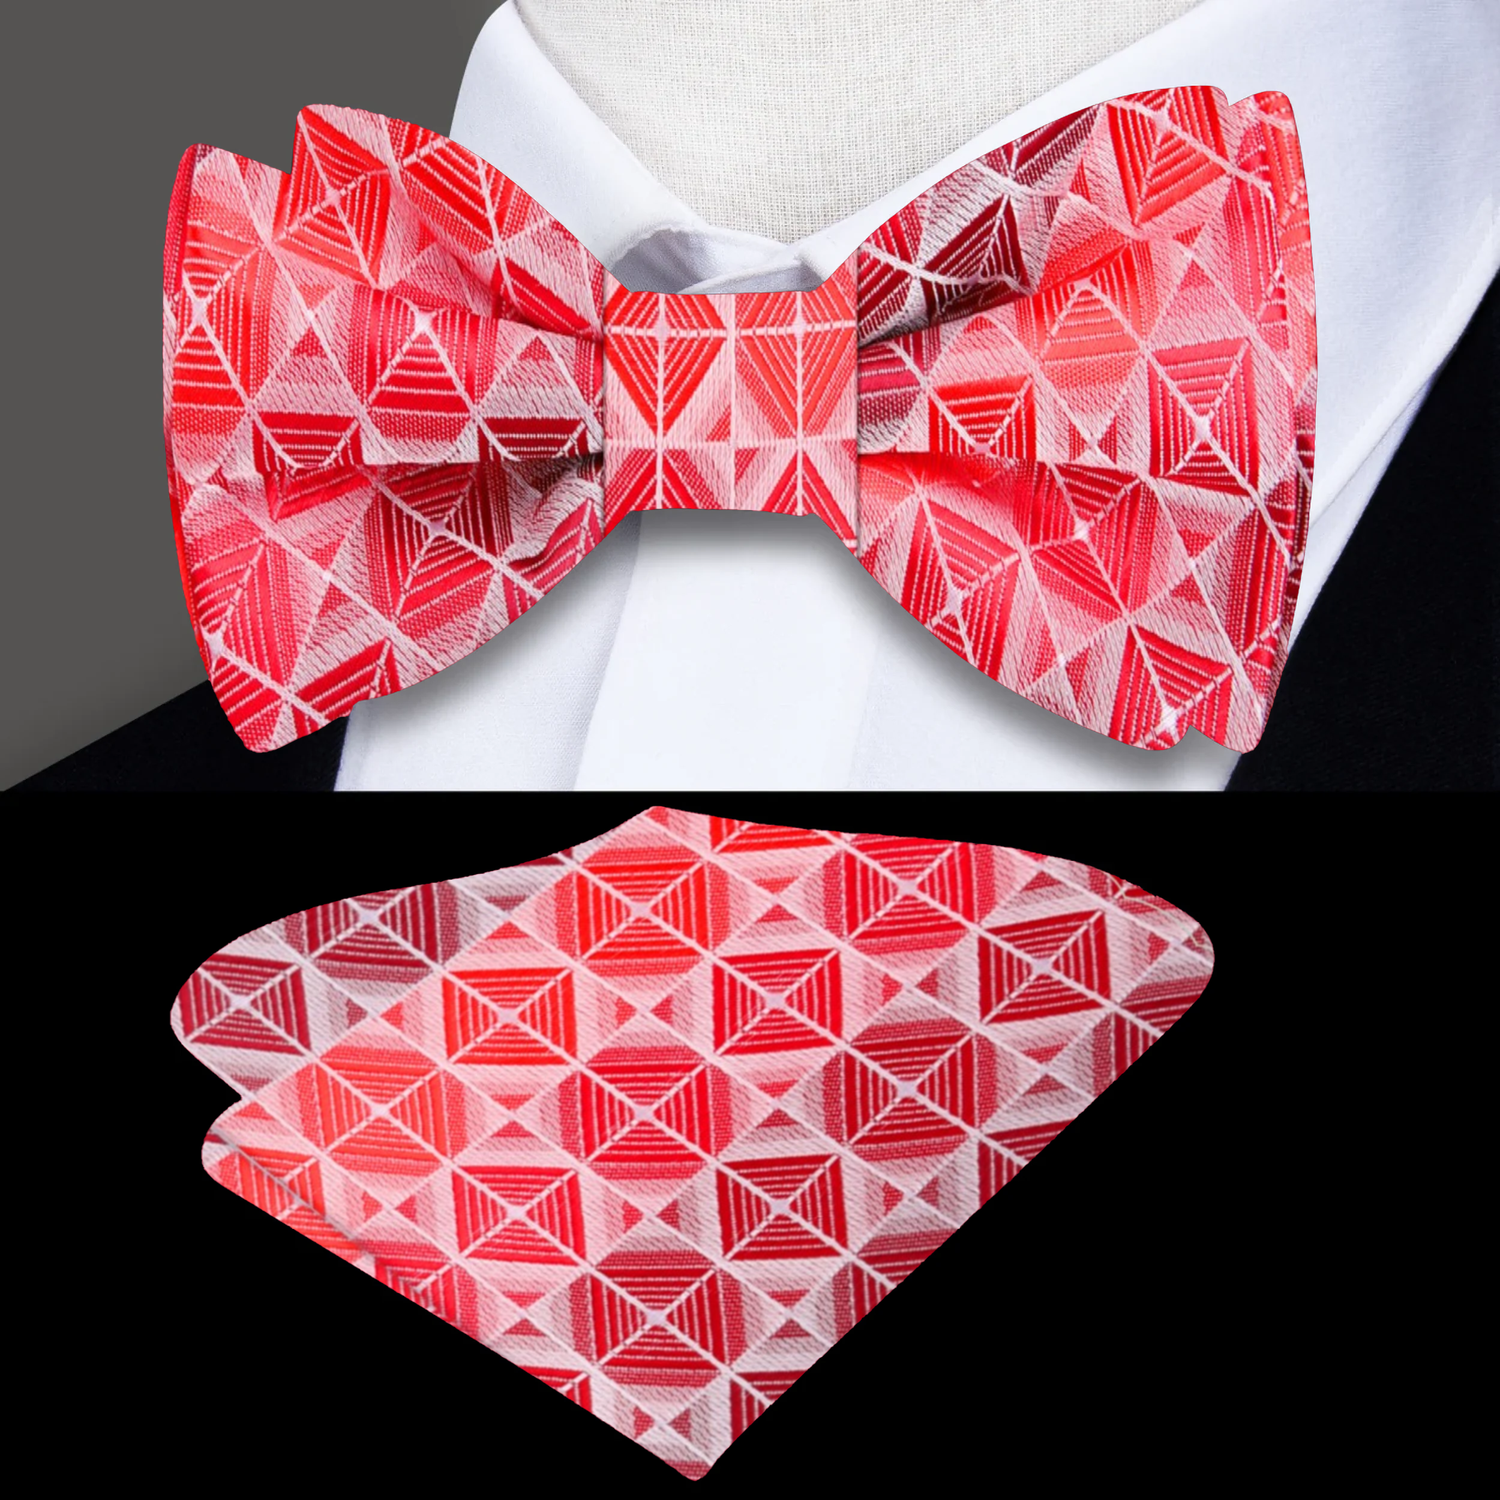 Main: Shades of Red Geometric Bow Tie and Matching Square 